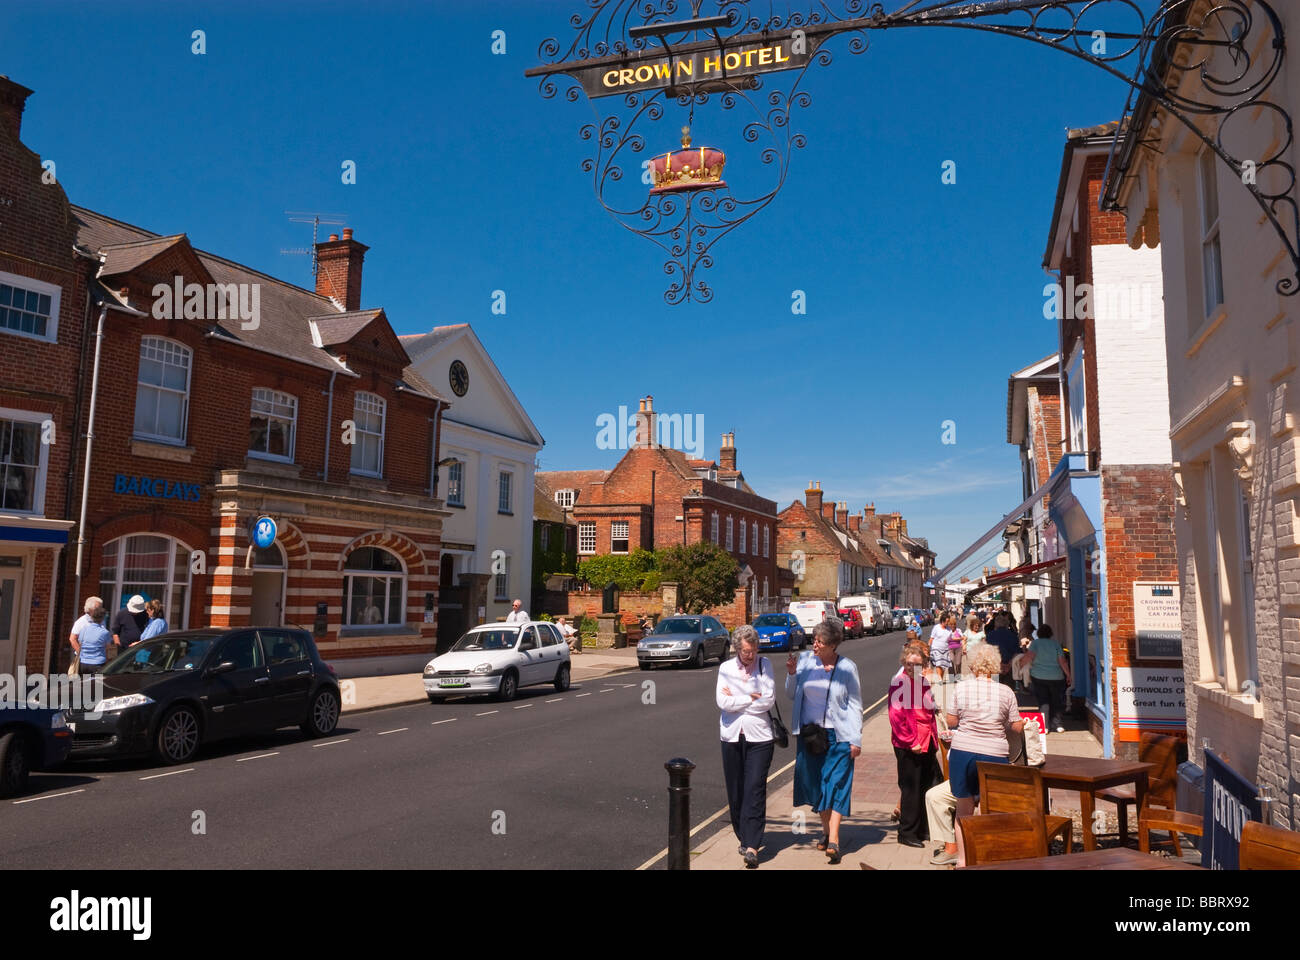 A view looking up Southwold high street with people shopping and the crown hotel in the foreground in Suffolk Uk Stock Photo